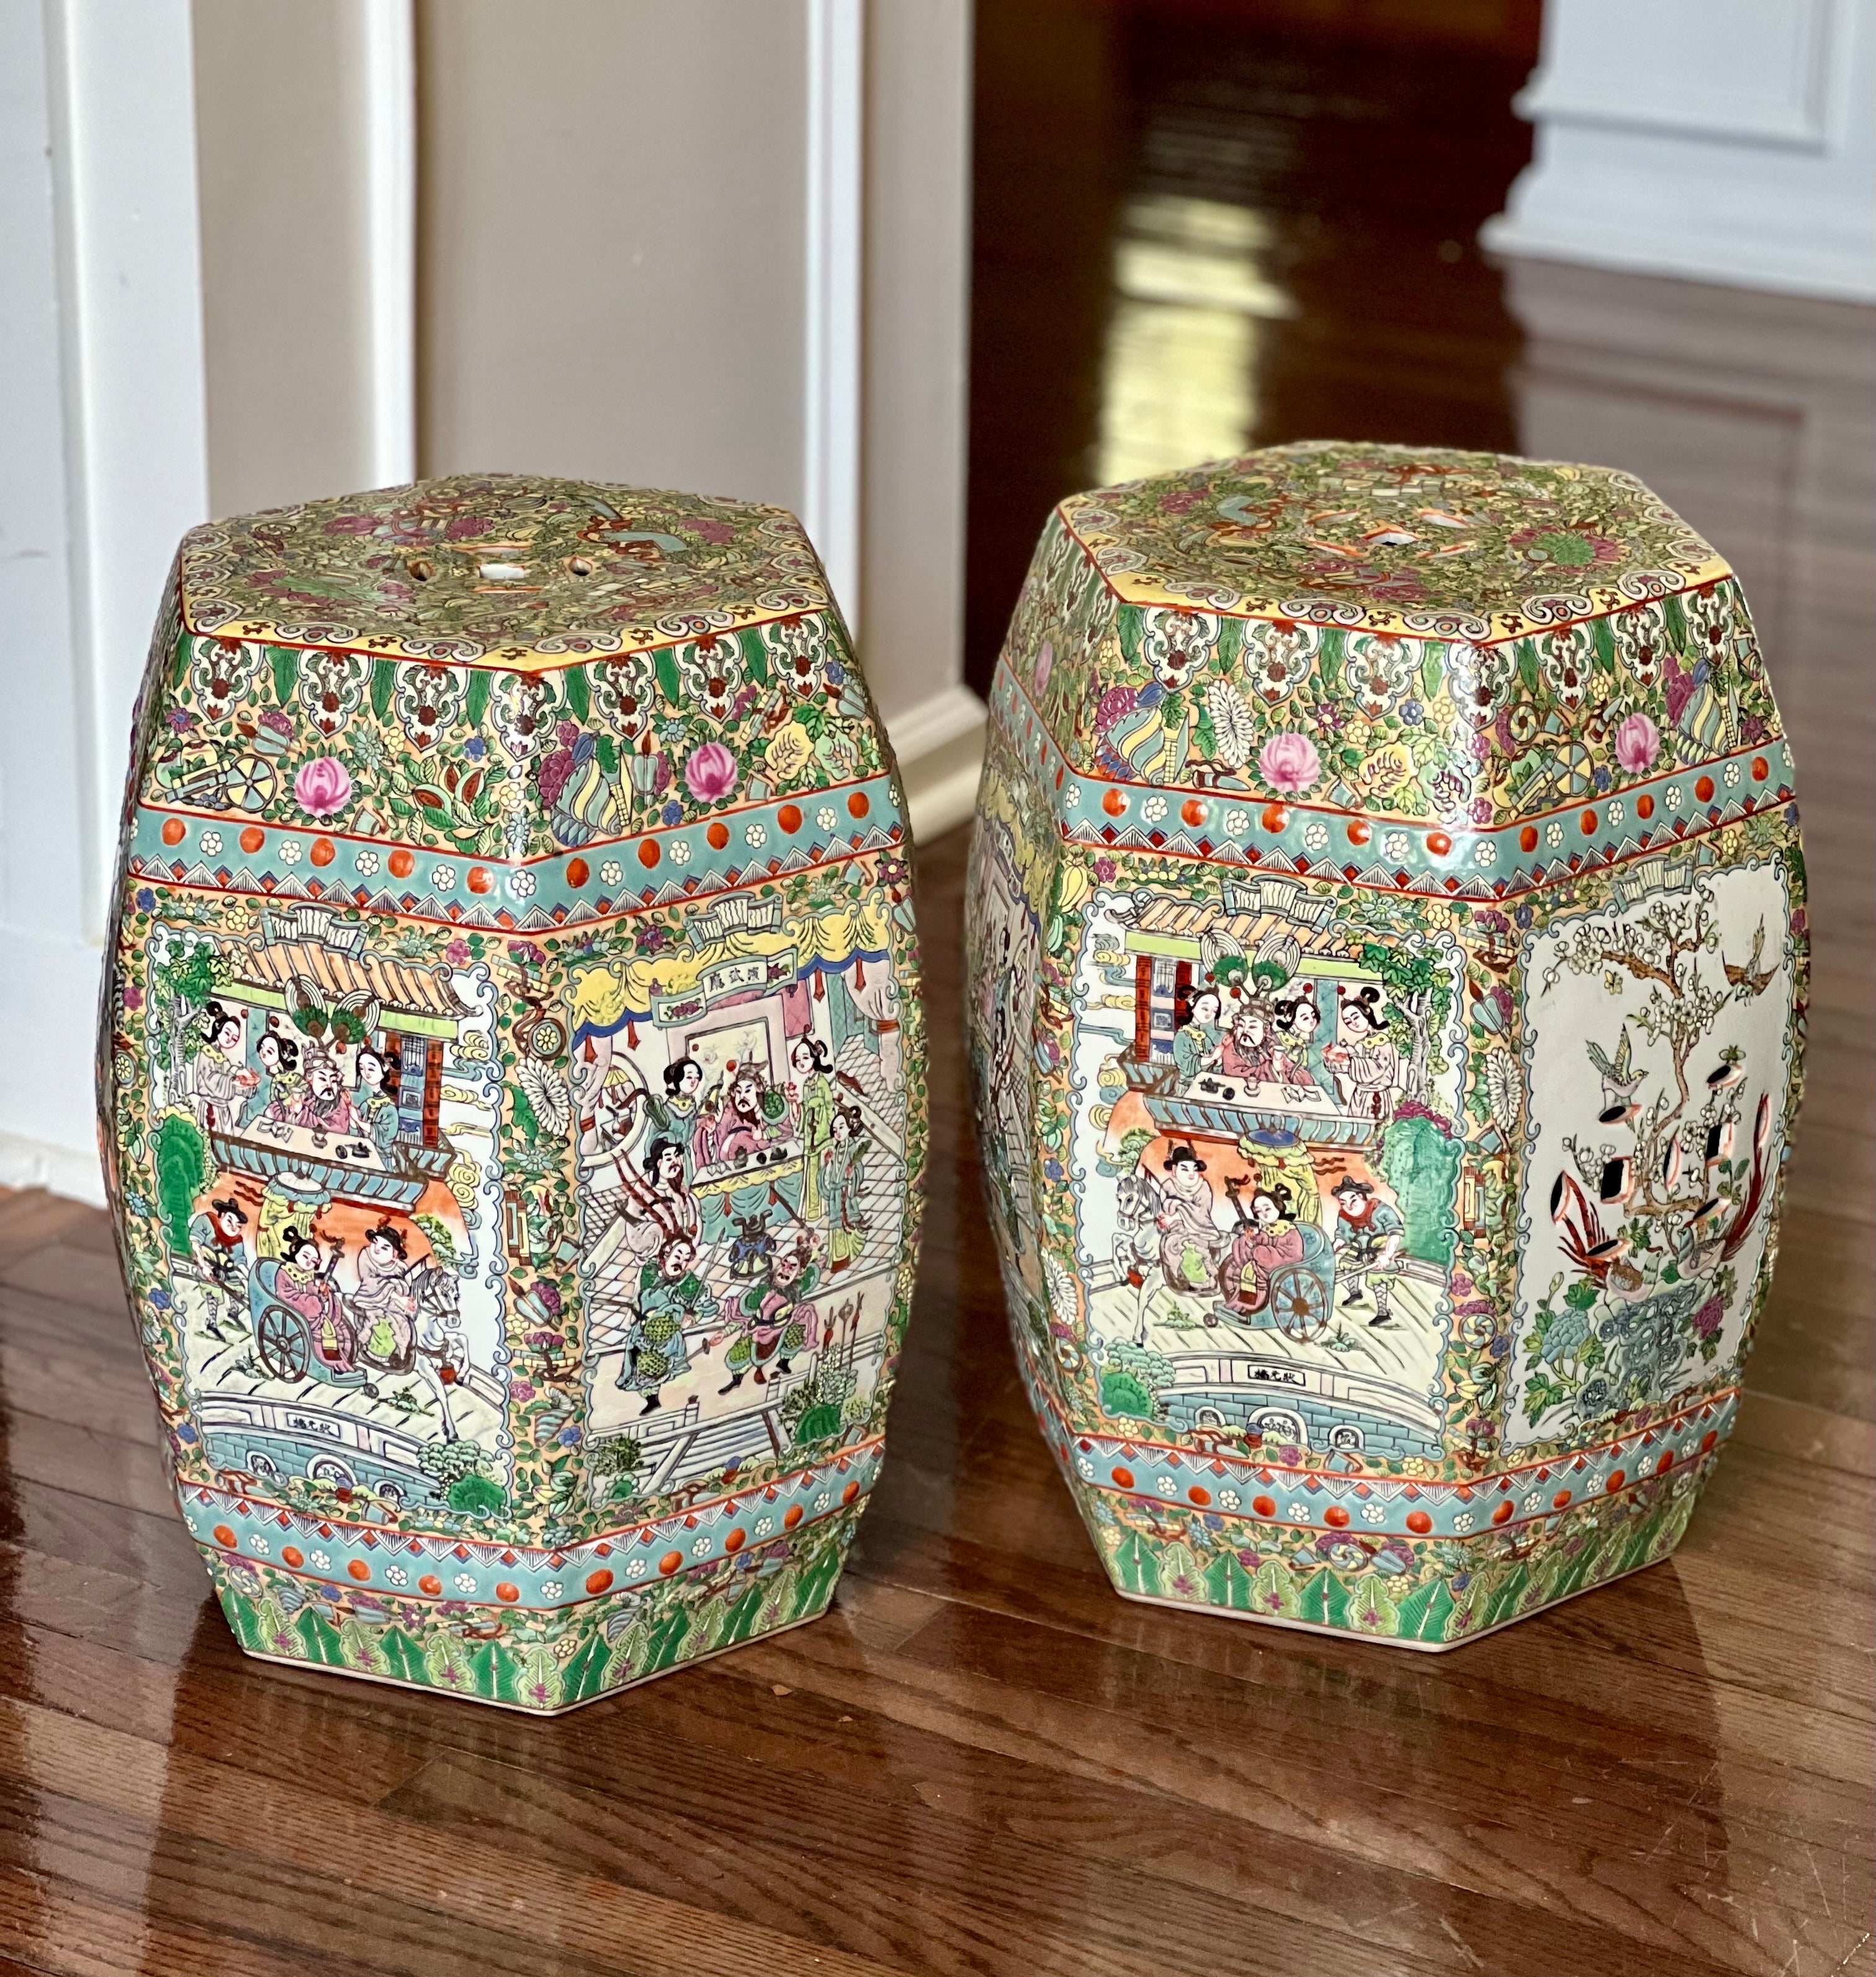 Pair of vintage hand painted porcelain Chinese garden stools, c. 1950's.

Gorgeous pair of Chinese Canton style rose medallion stools with hexagon shape. They feature intricate, reticulated designs with gardens, floral motifs and birds with scenes